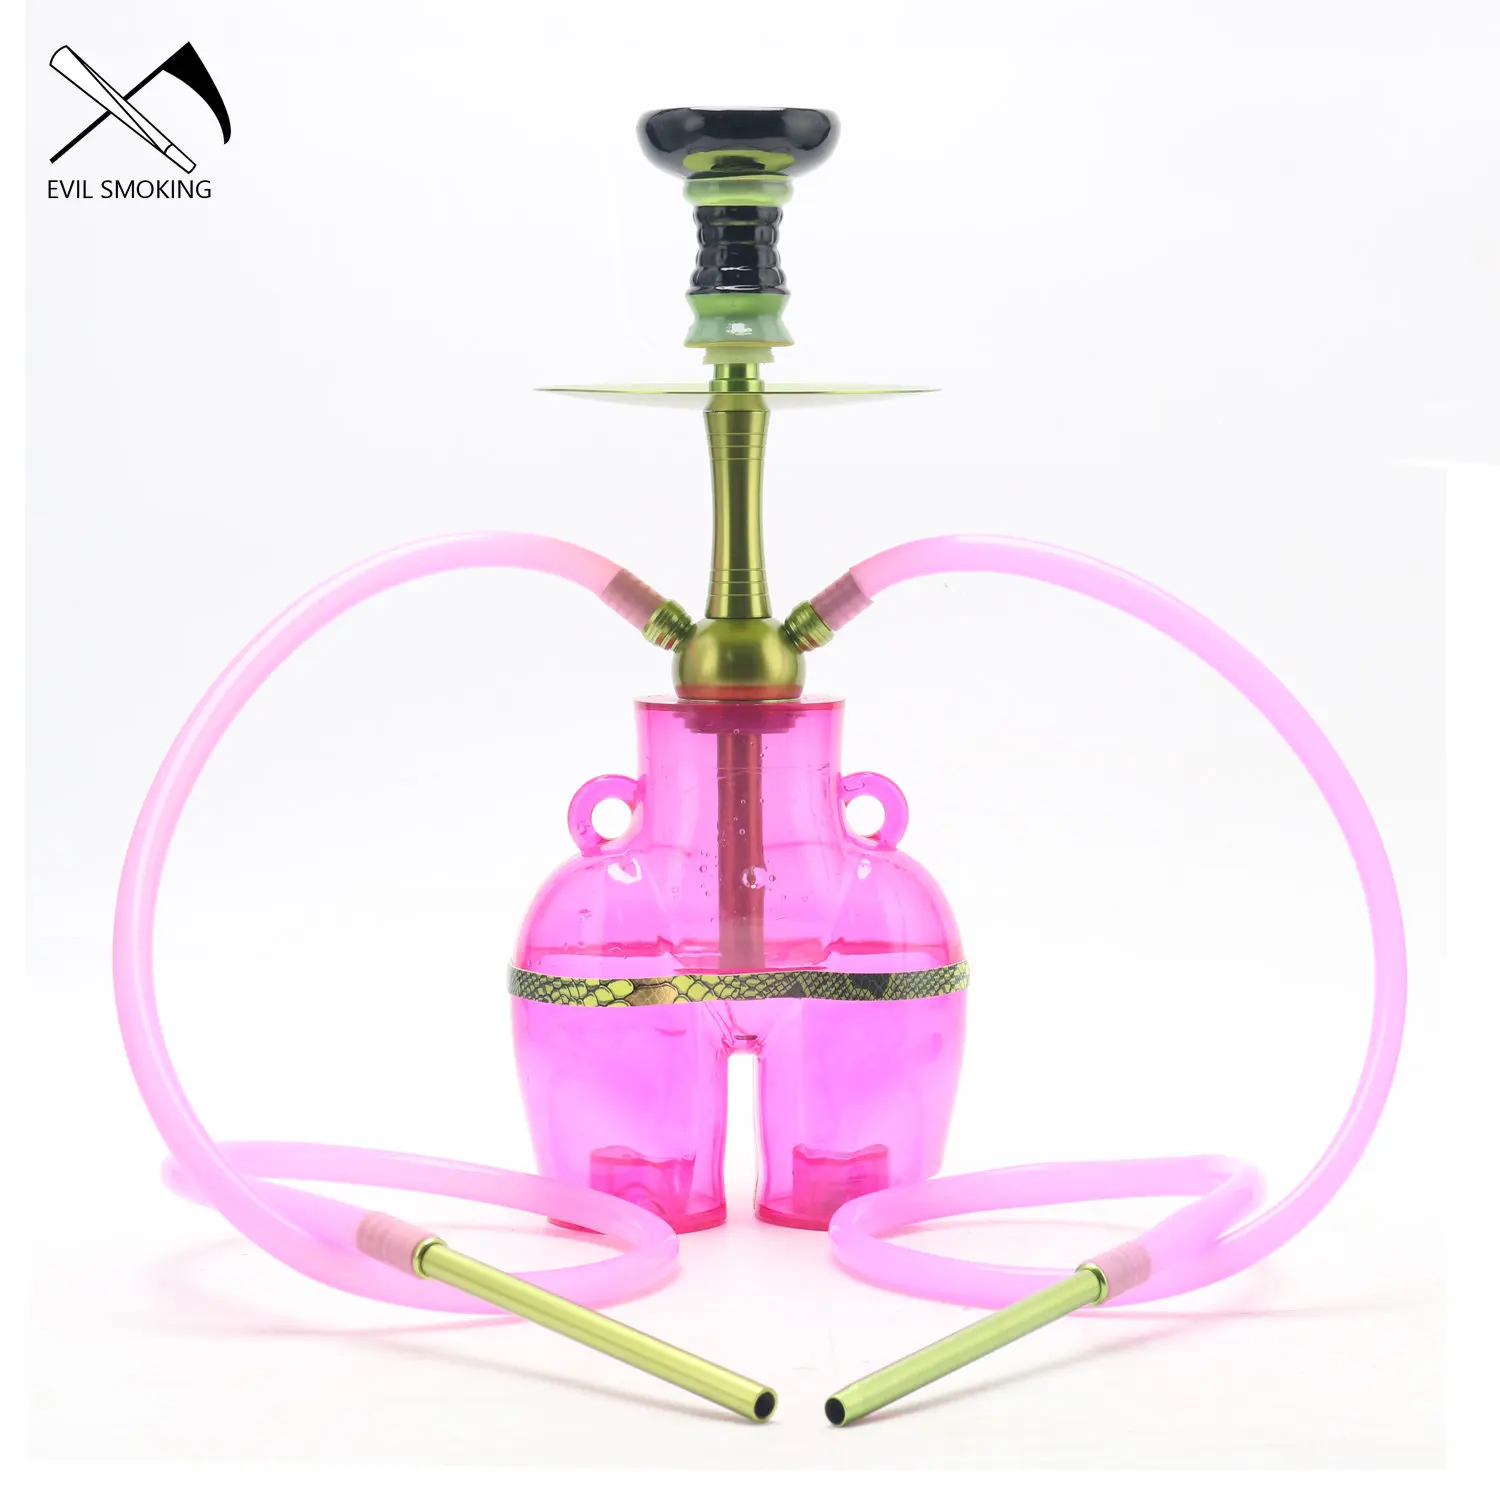 EVIL SMOKING Big Butt Sexy LED Hookah Set 3 with Chicha Bowl Hose Narguilhe Completo Party Ktv Bonga for Smoking Accessories